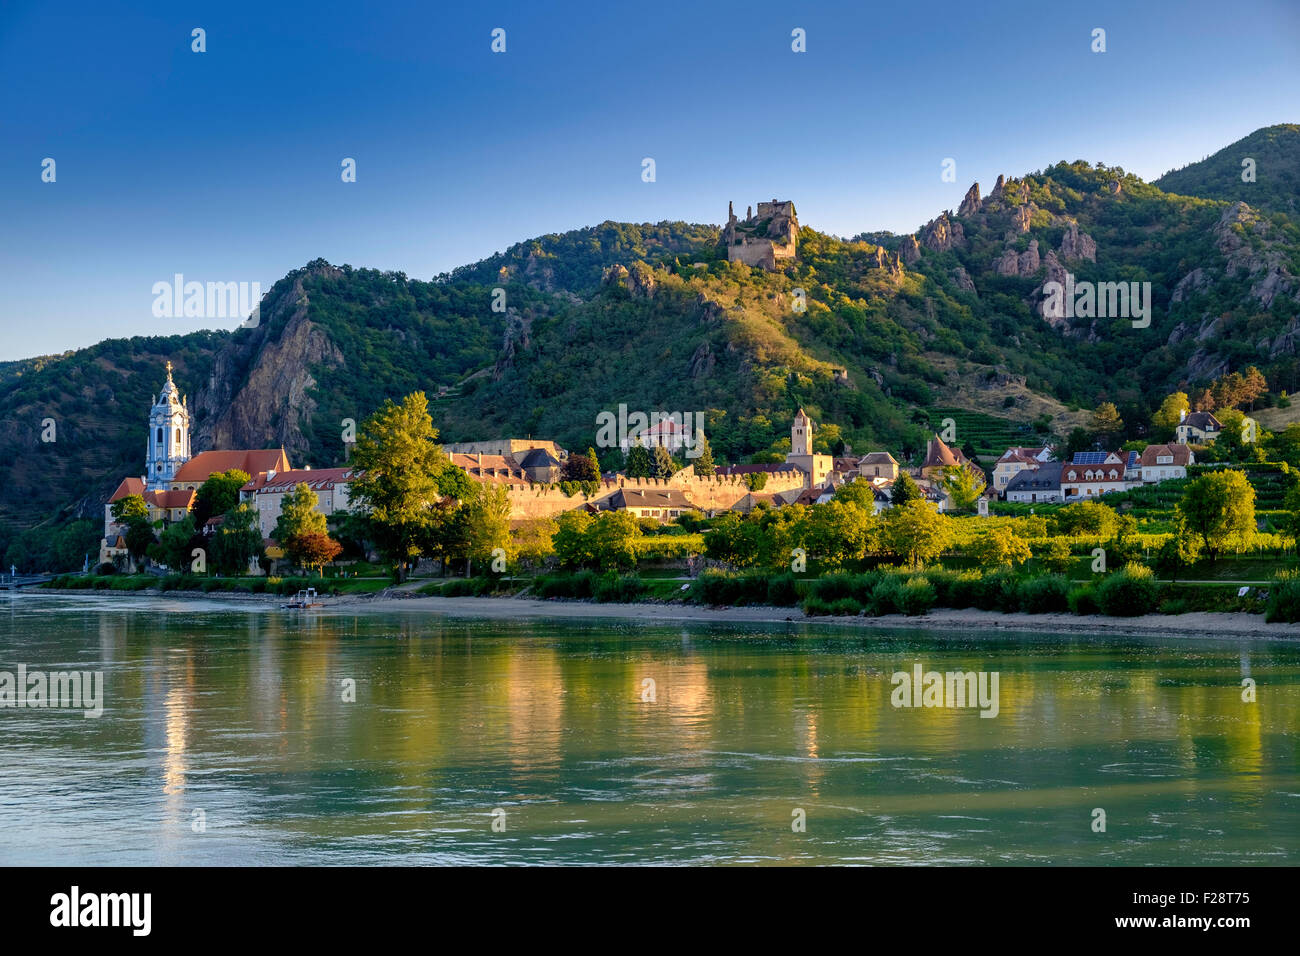 Durnstein on the banks of the Danube in Austria in the Wachau Valley.Ruins of   Kuenringer Castle on the hilltop . Church spire. Stock Photo